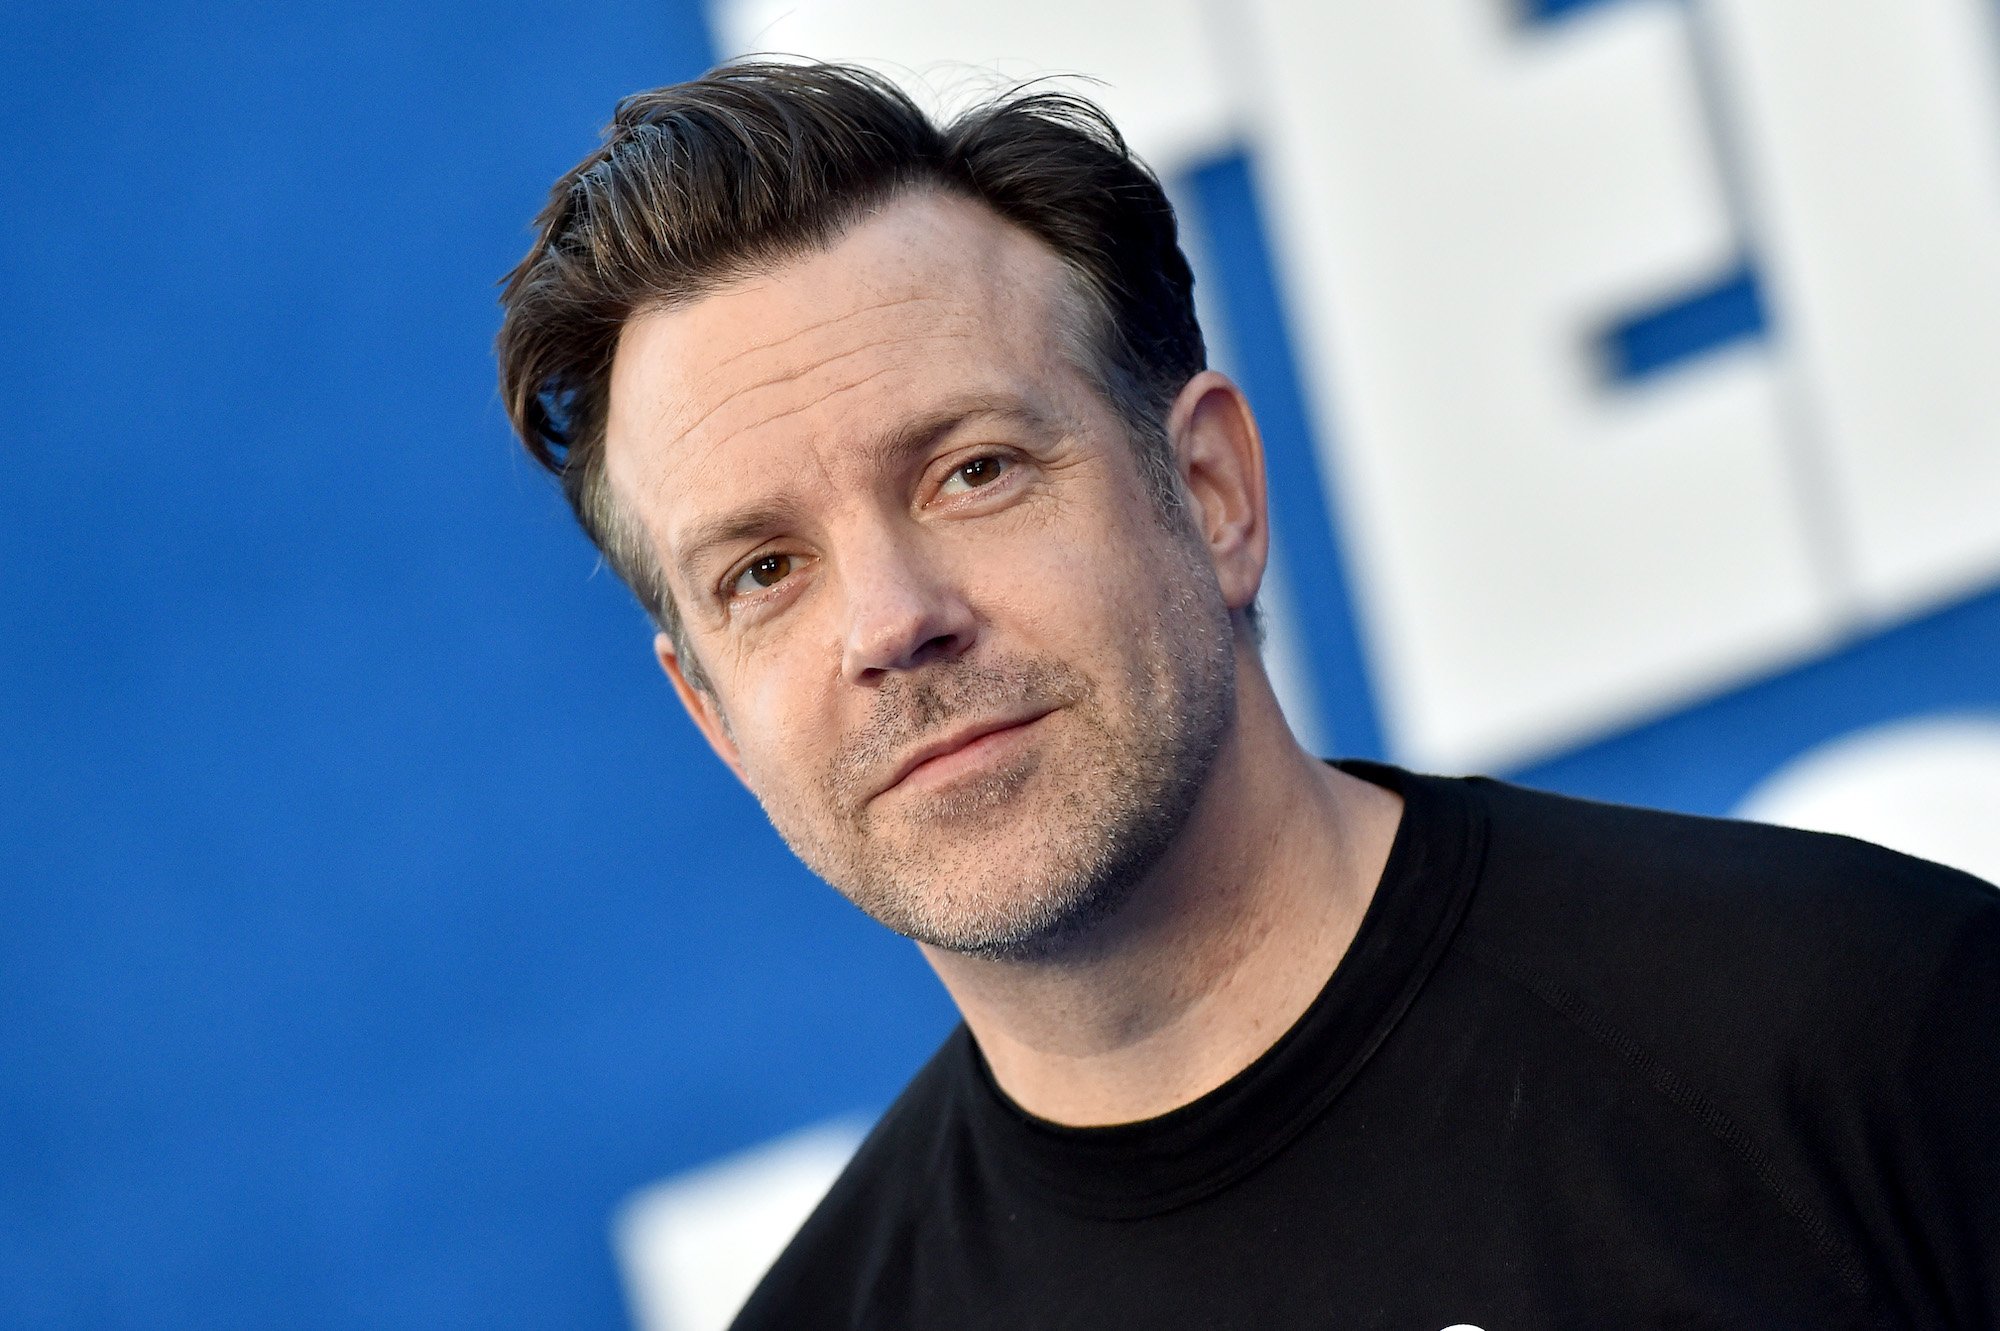 Jason Sudeikis poses for cameras in a black shirt at the season 2 premiere of 'Ted Lasso'